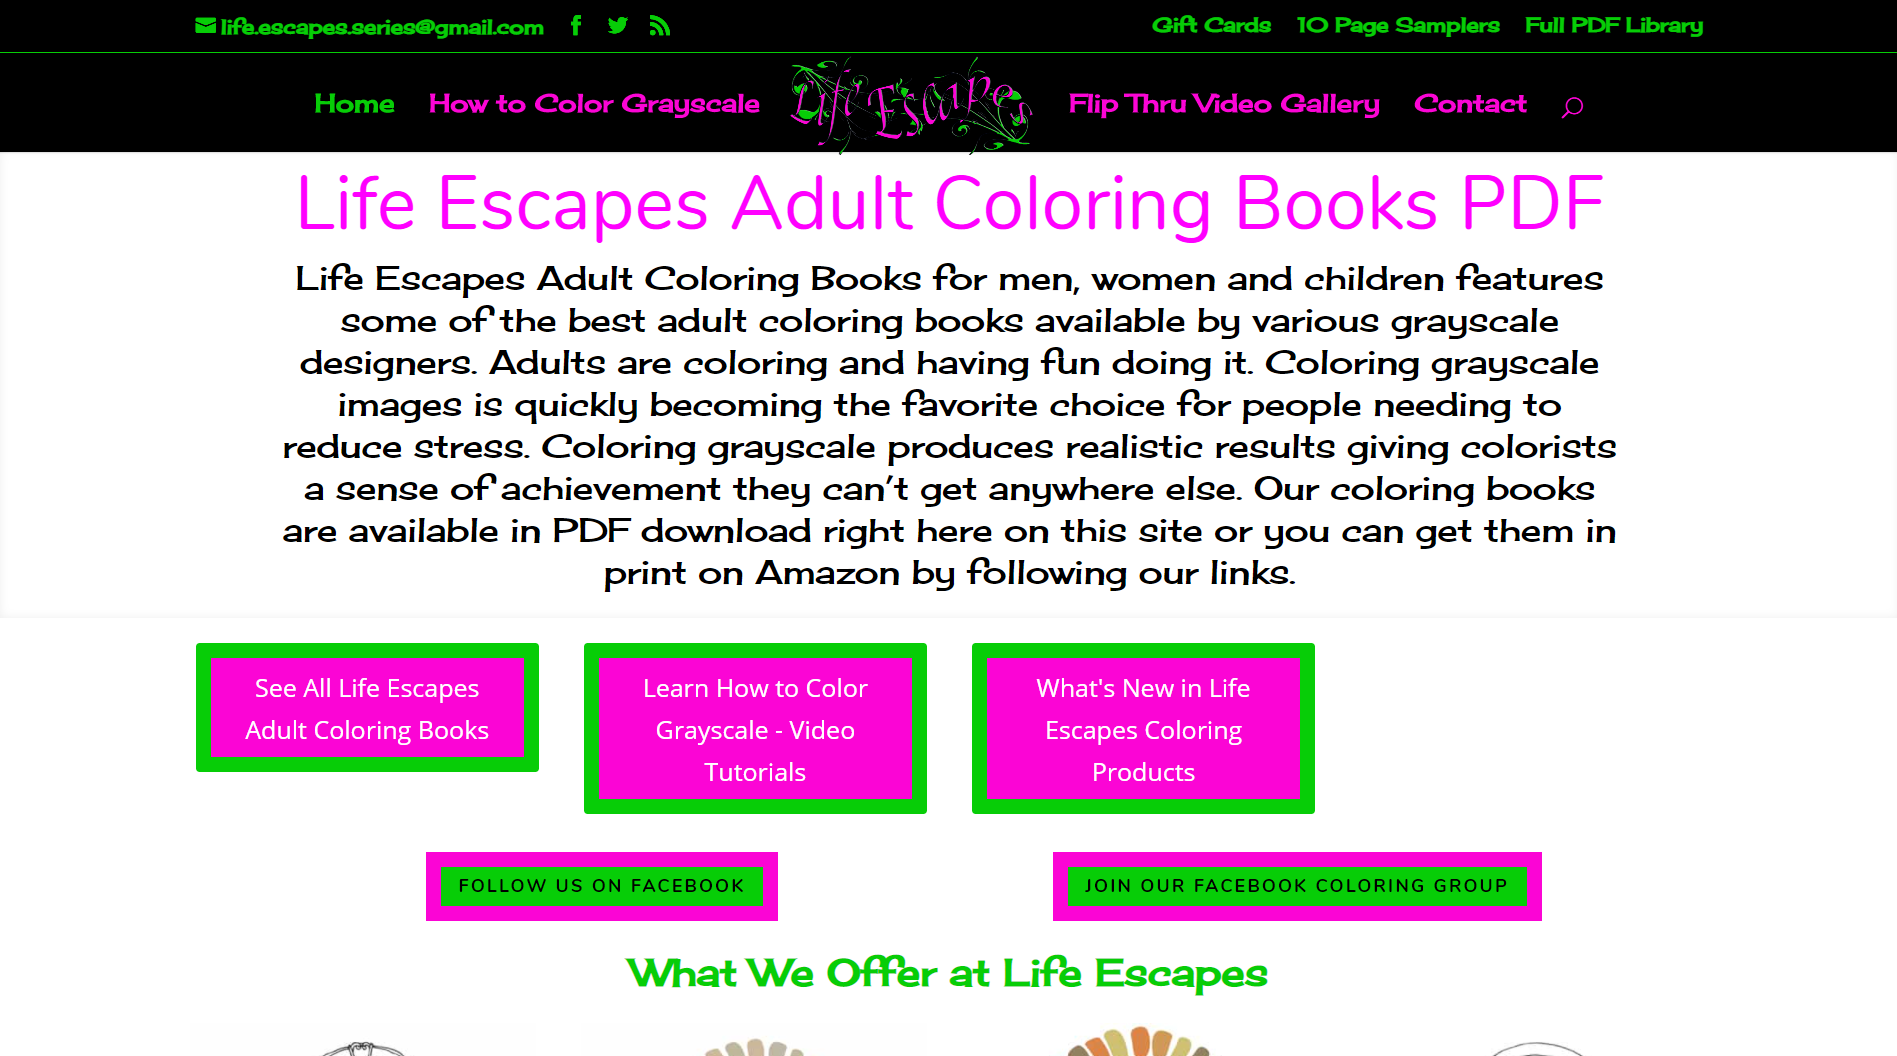 coloringbooksforadults.shop (brand portability) from amazon to .shop